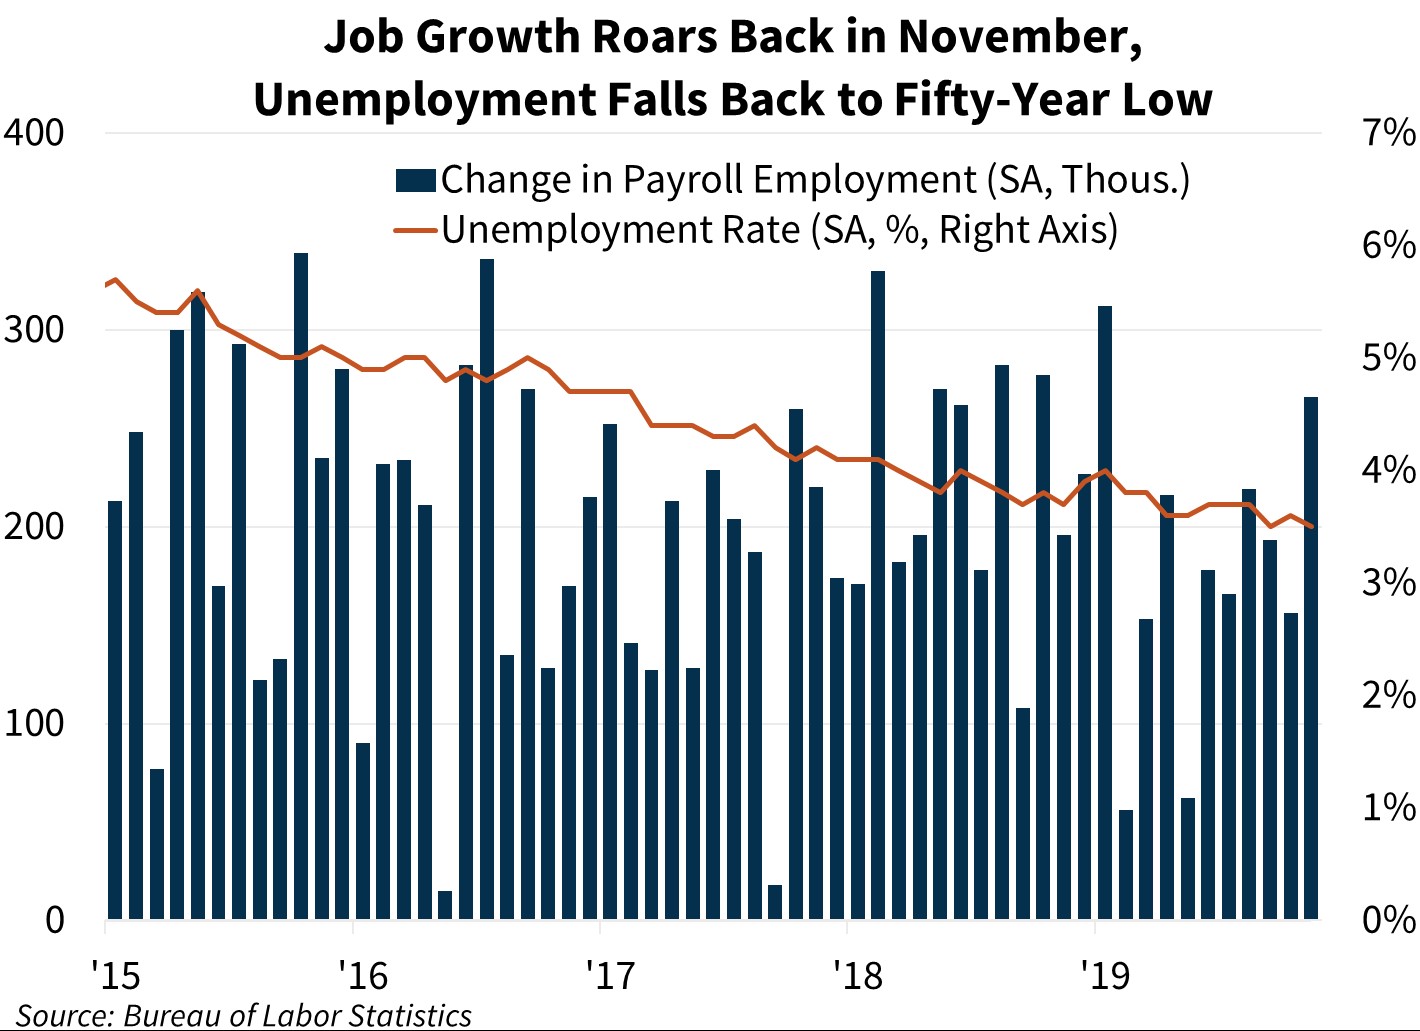 Job Growth Roars Back in November, Unemployment Falls Back to Fifty-Year Low